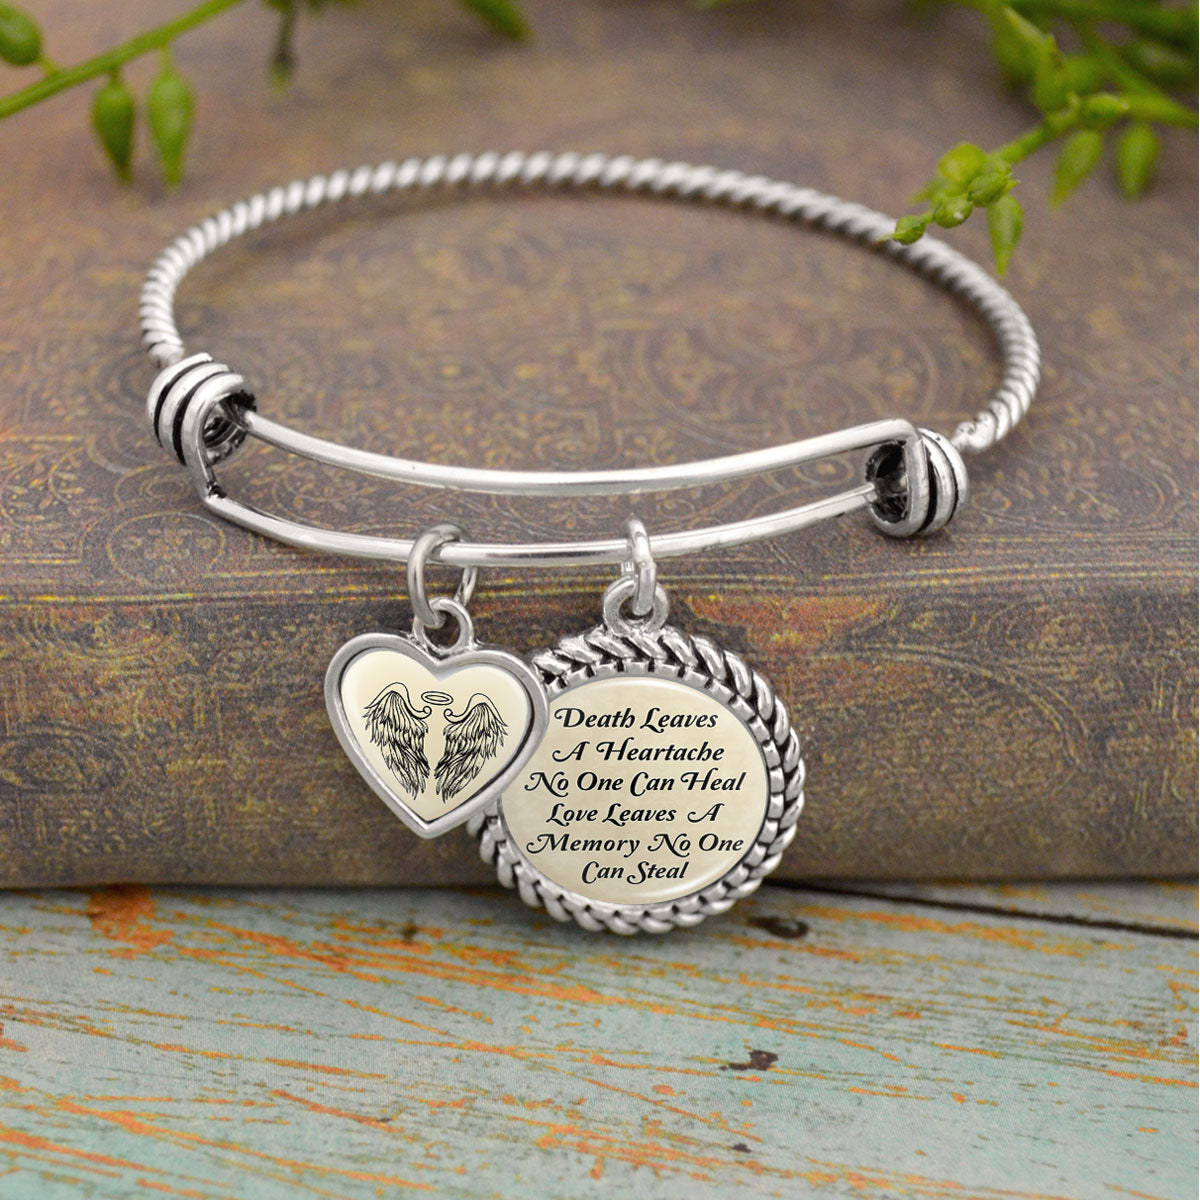 Love Leaves A Memory No One Can Steal Charm Bracelet